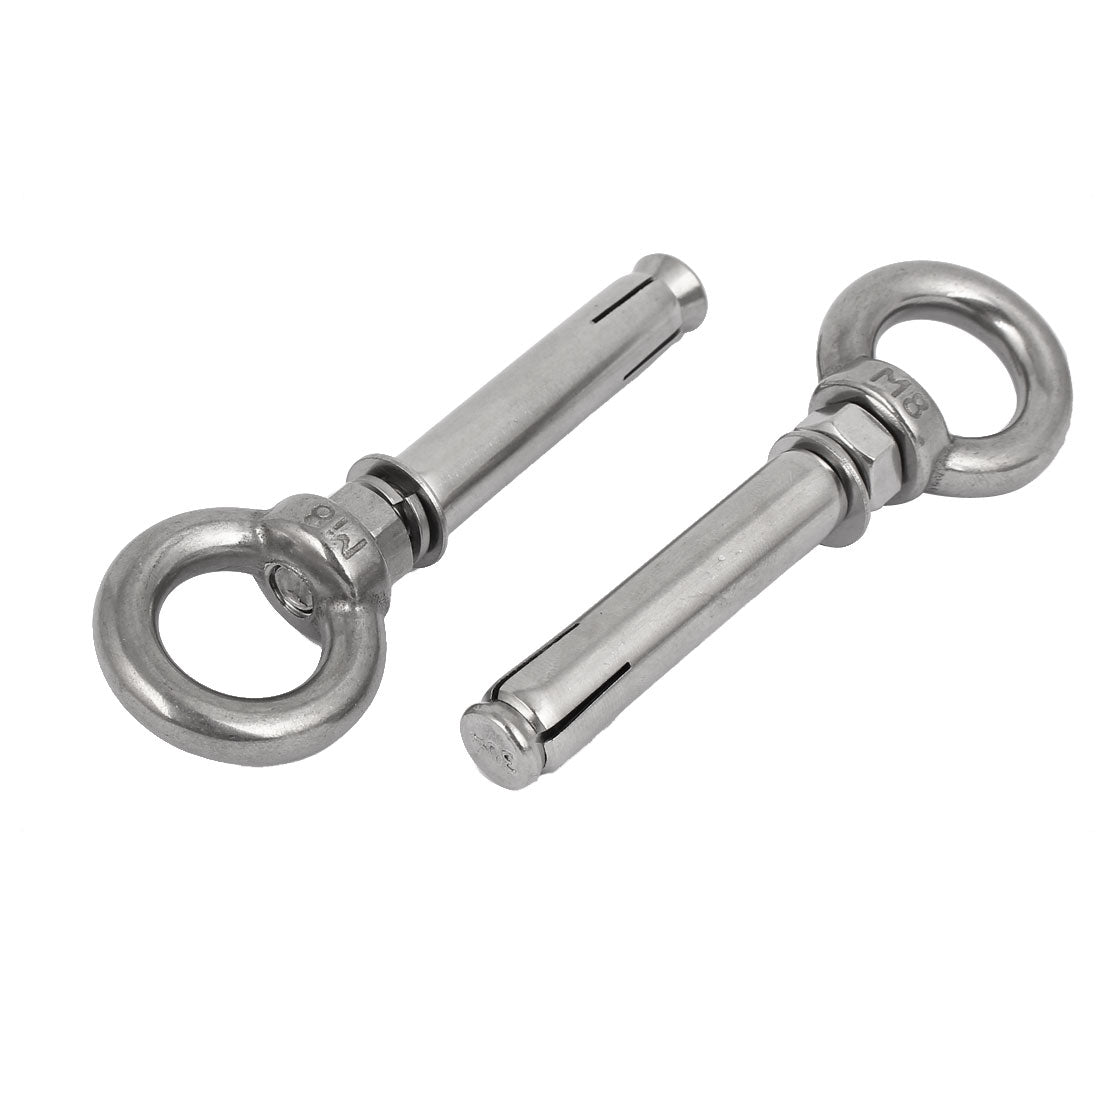 Uxcell Uxcell M8x80mm Wall 304 Stainless Steel Expansion Screws Closed Hook Shield Bolts 2pcs